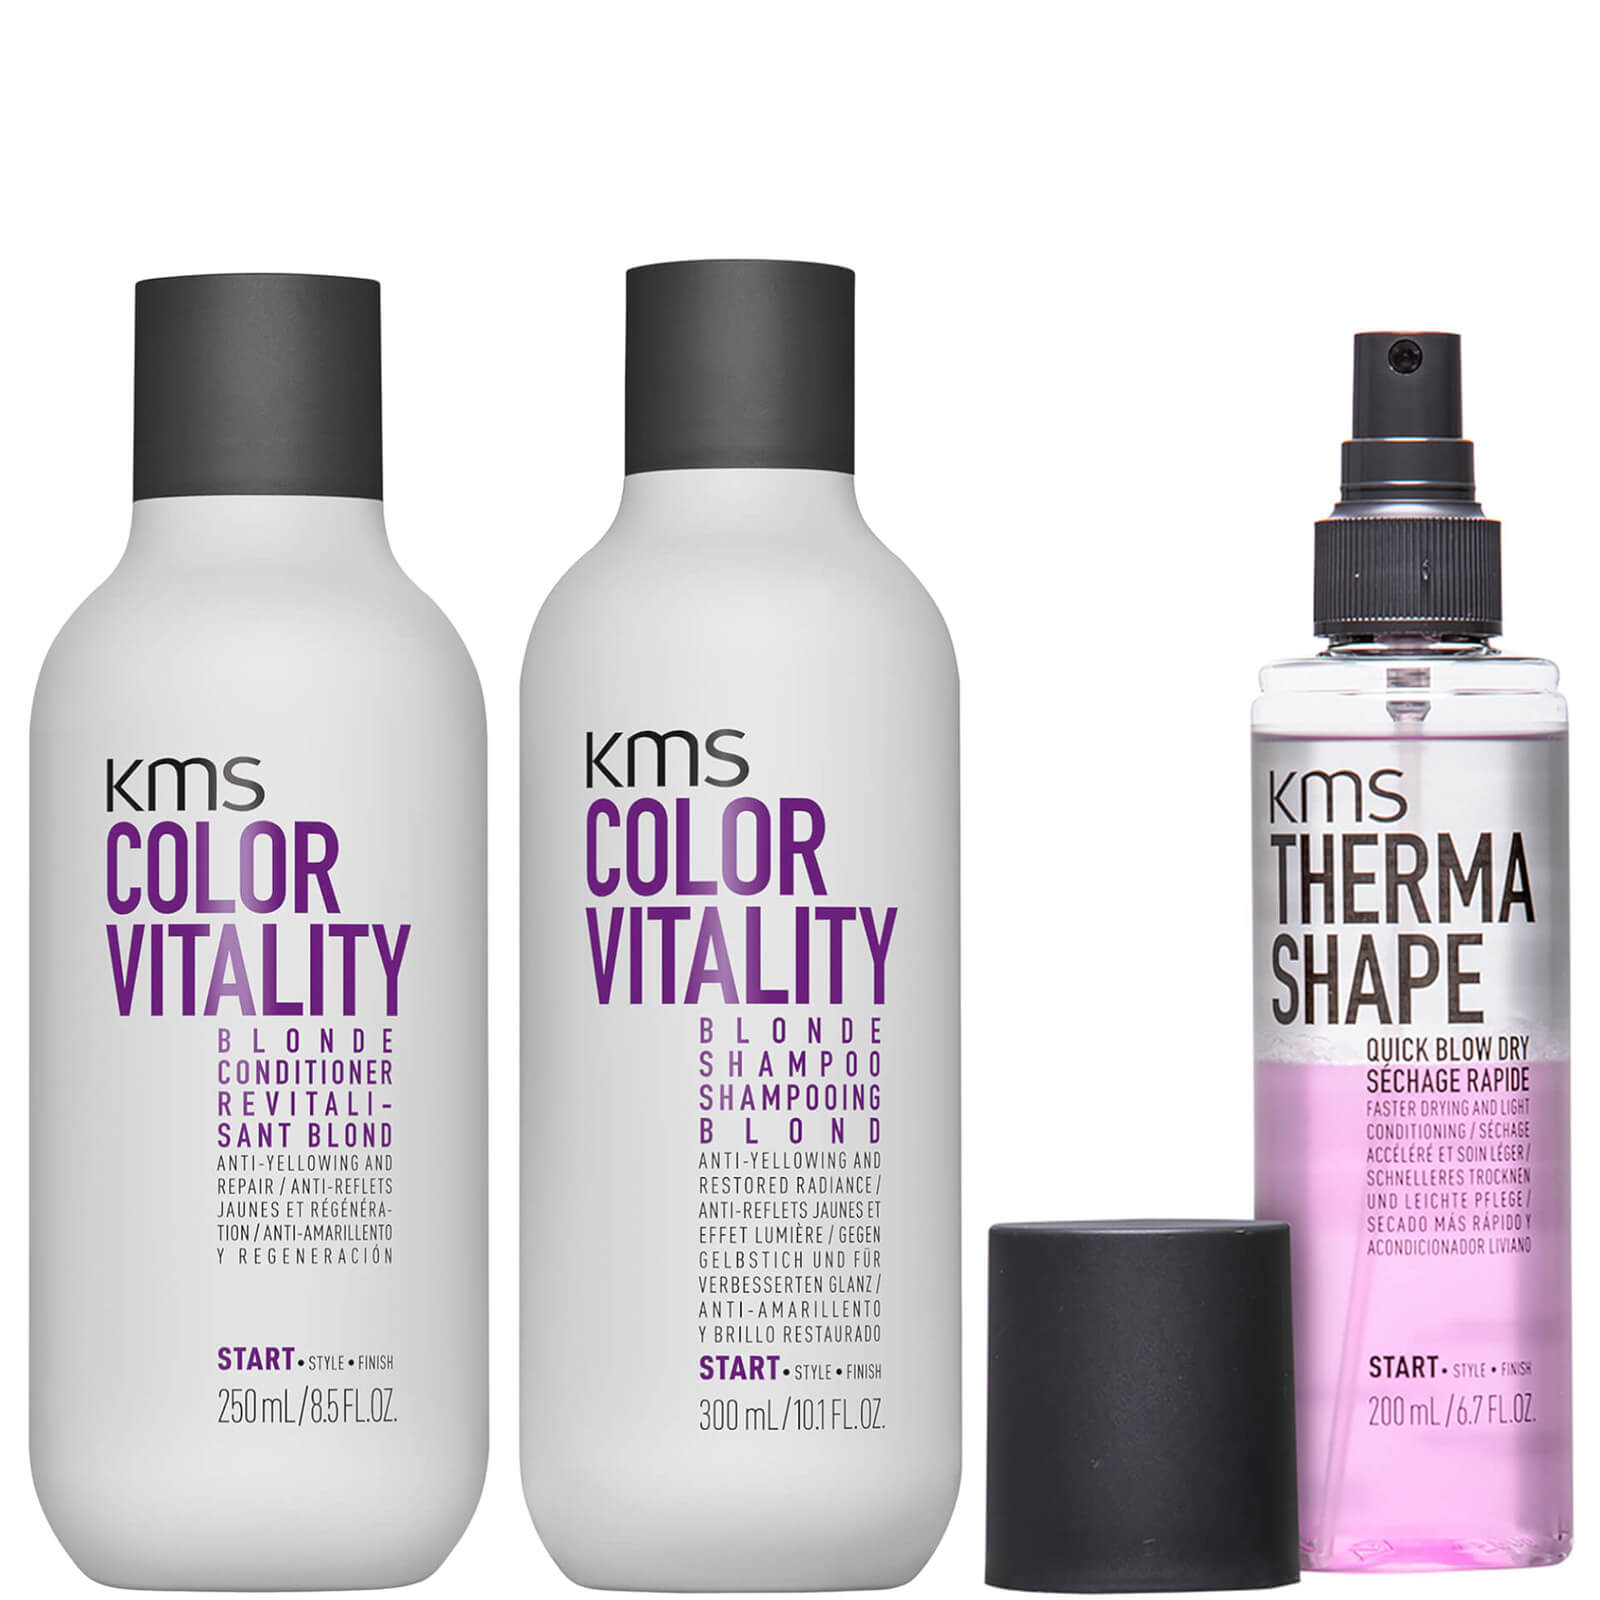 KMS Color Vitality Blonde Trio (Worth PS62.25)